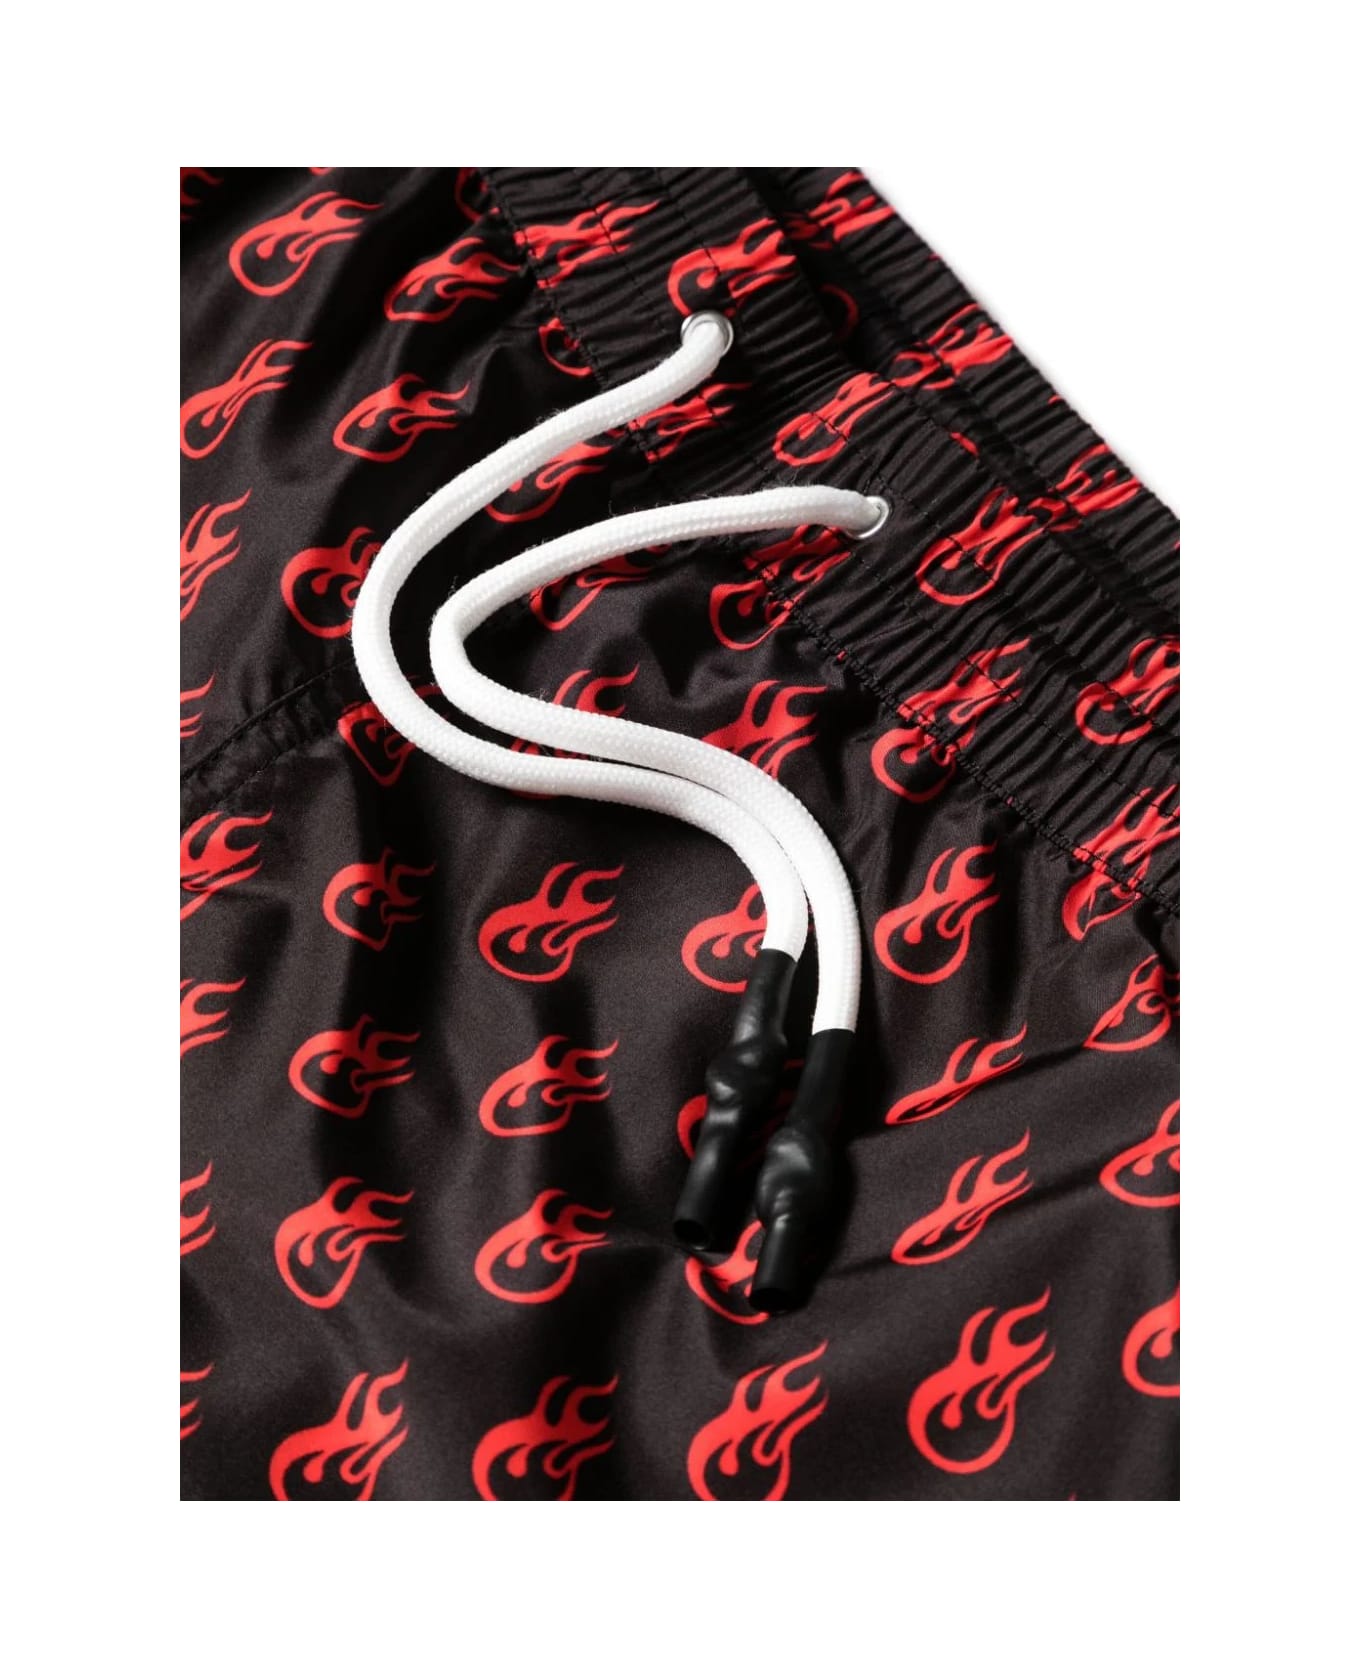 Vision of Super Black Swimwear With Red Flames Pattern - Black